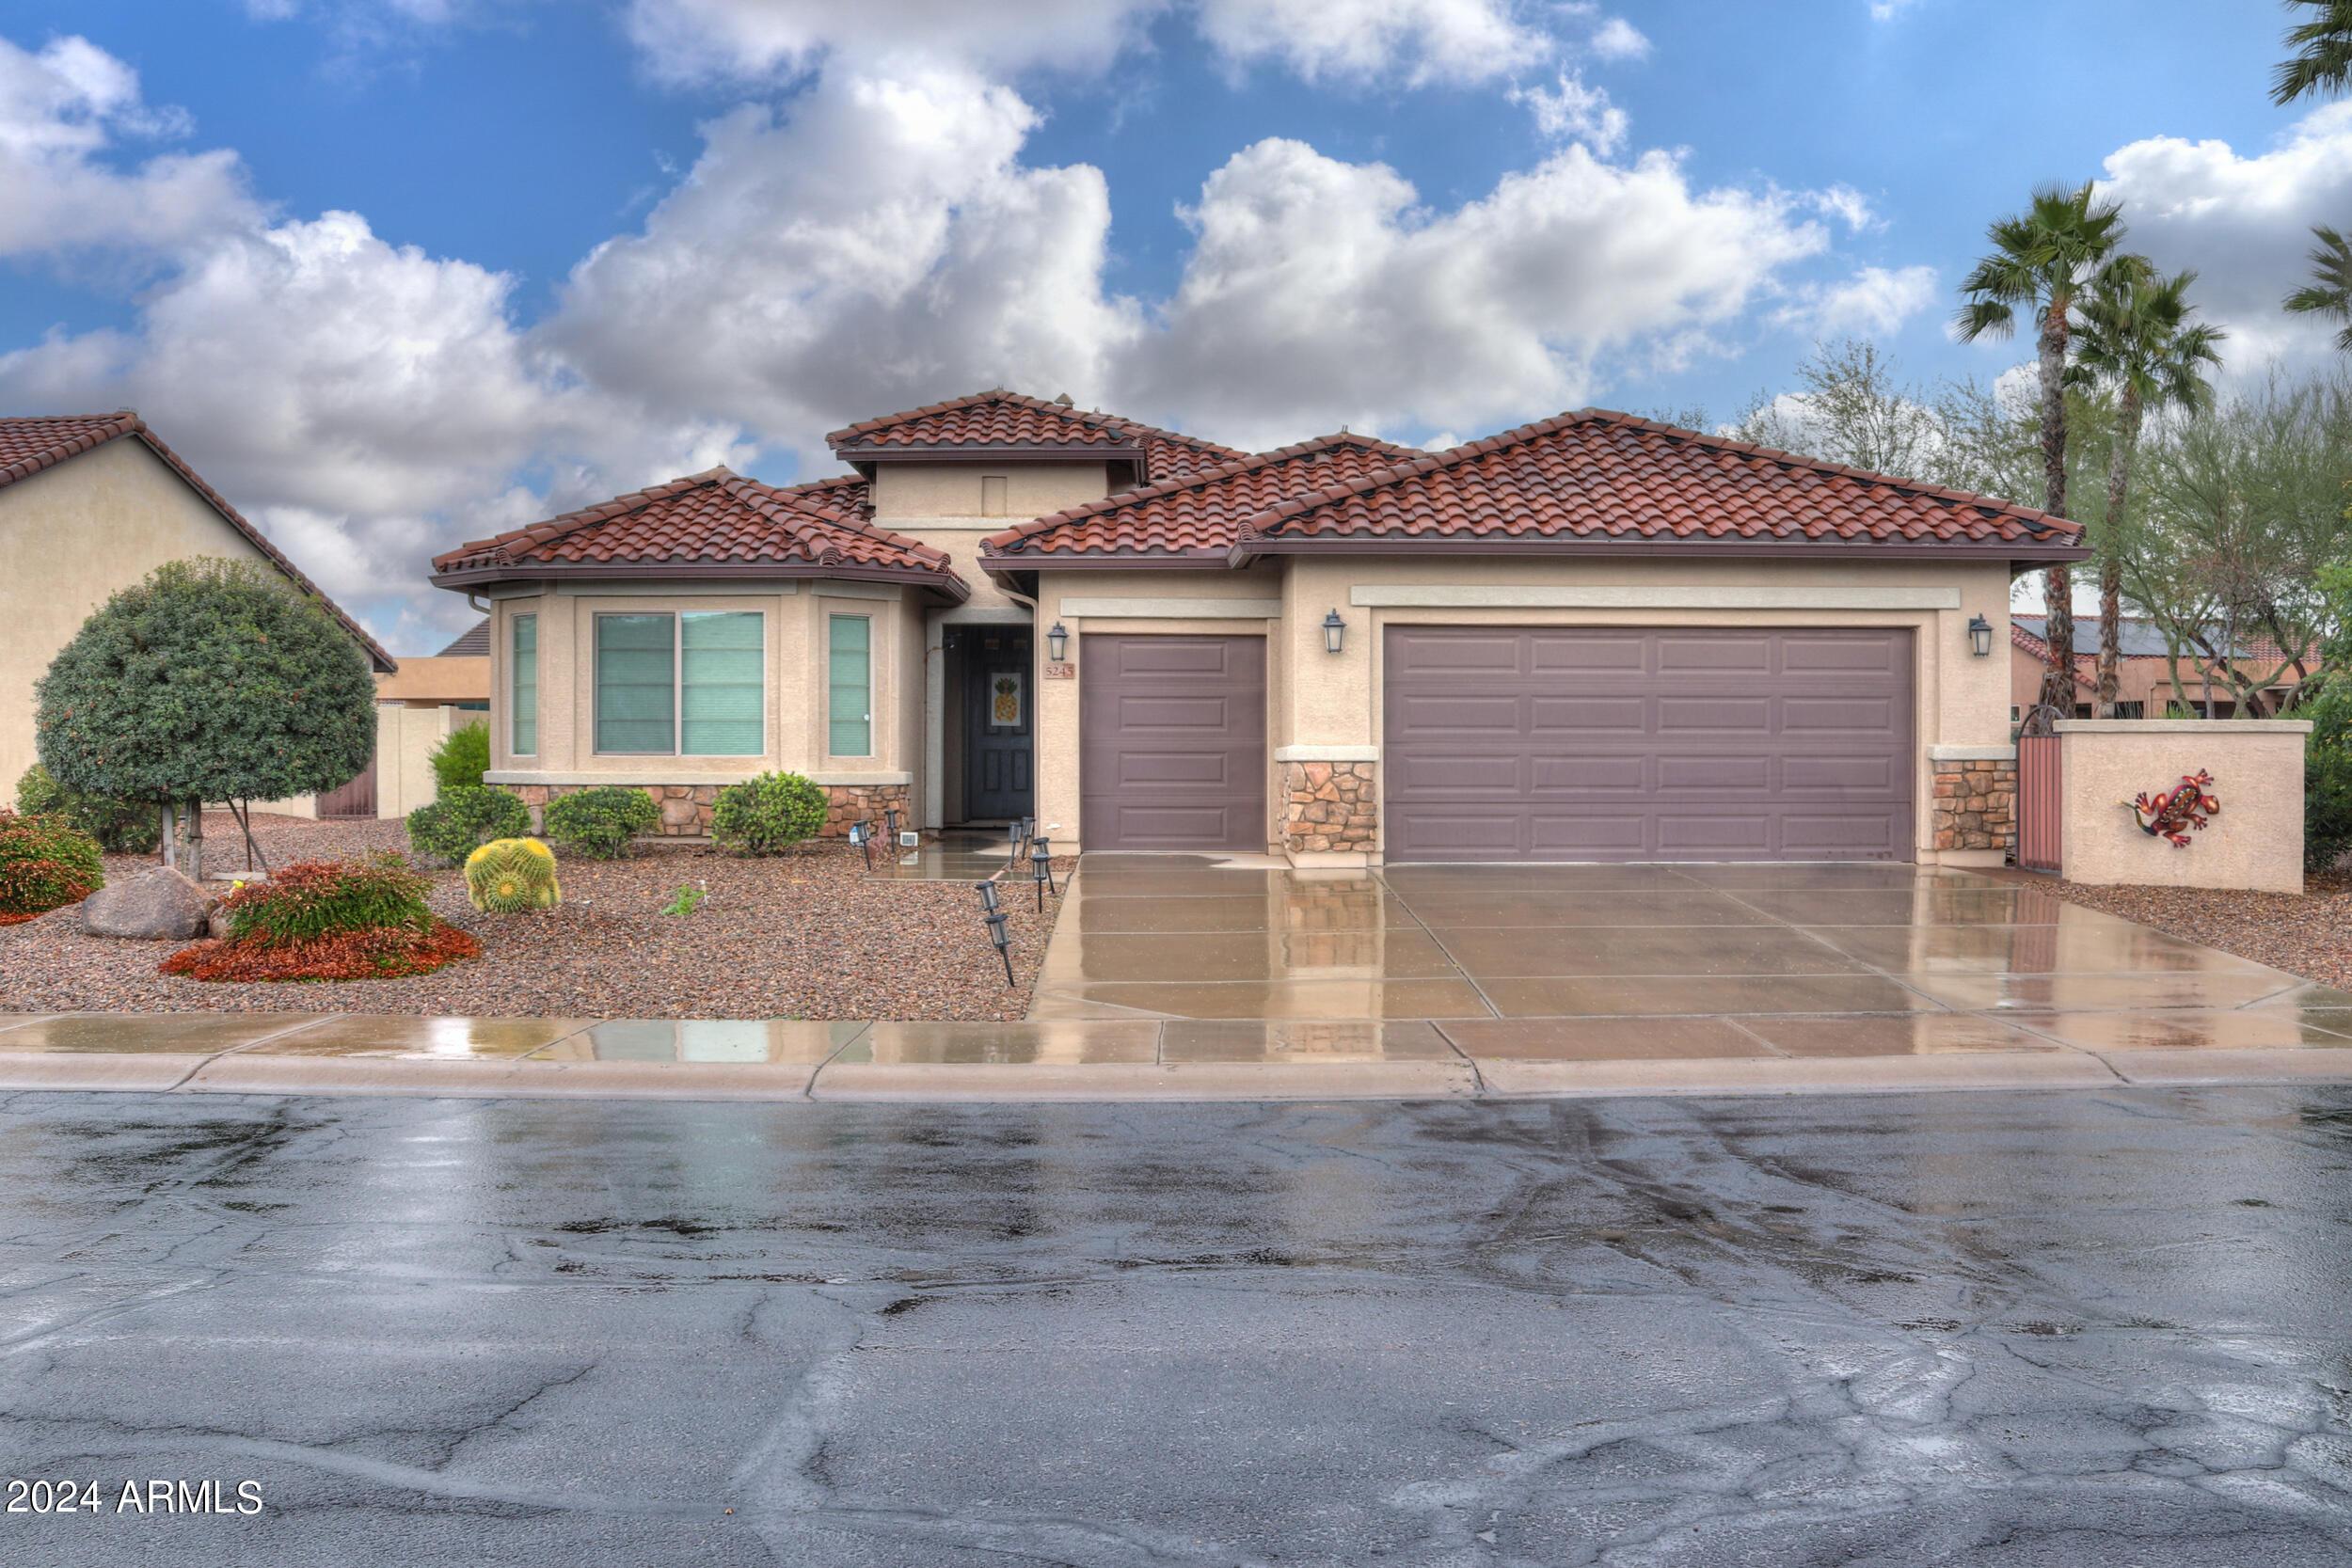 Photo one of 5245 N Grand Canyon Dr Eloy AZ 85131 | MLS 6659456